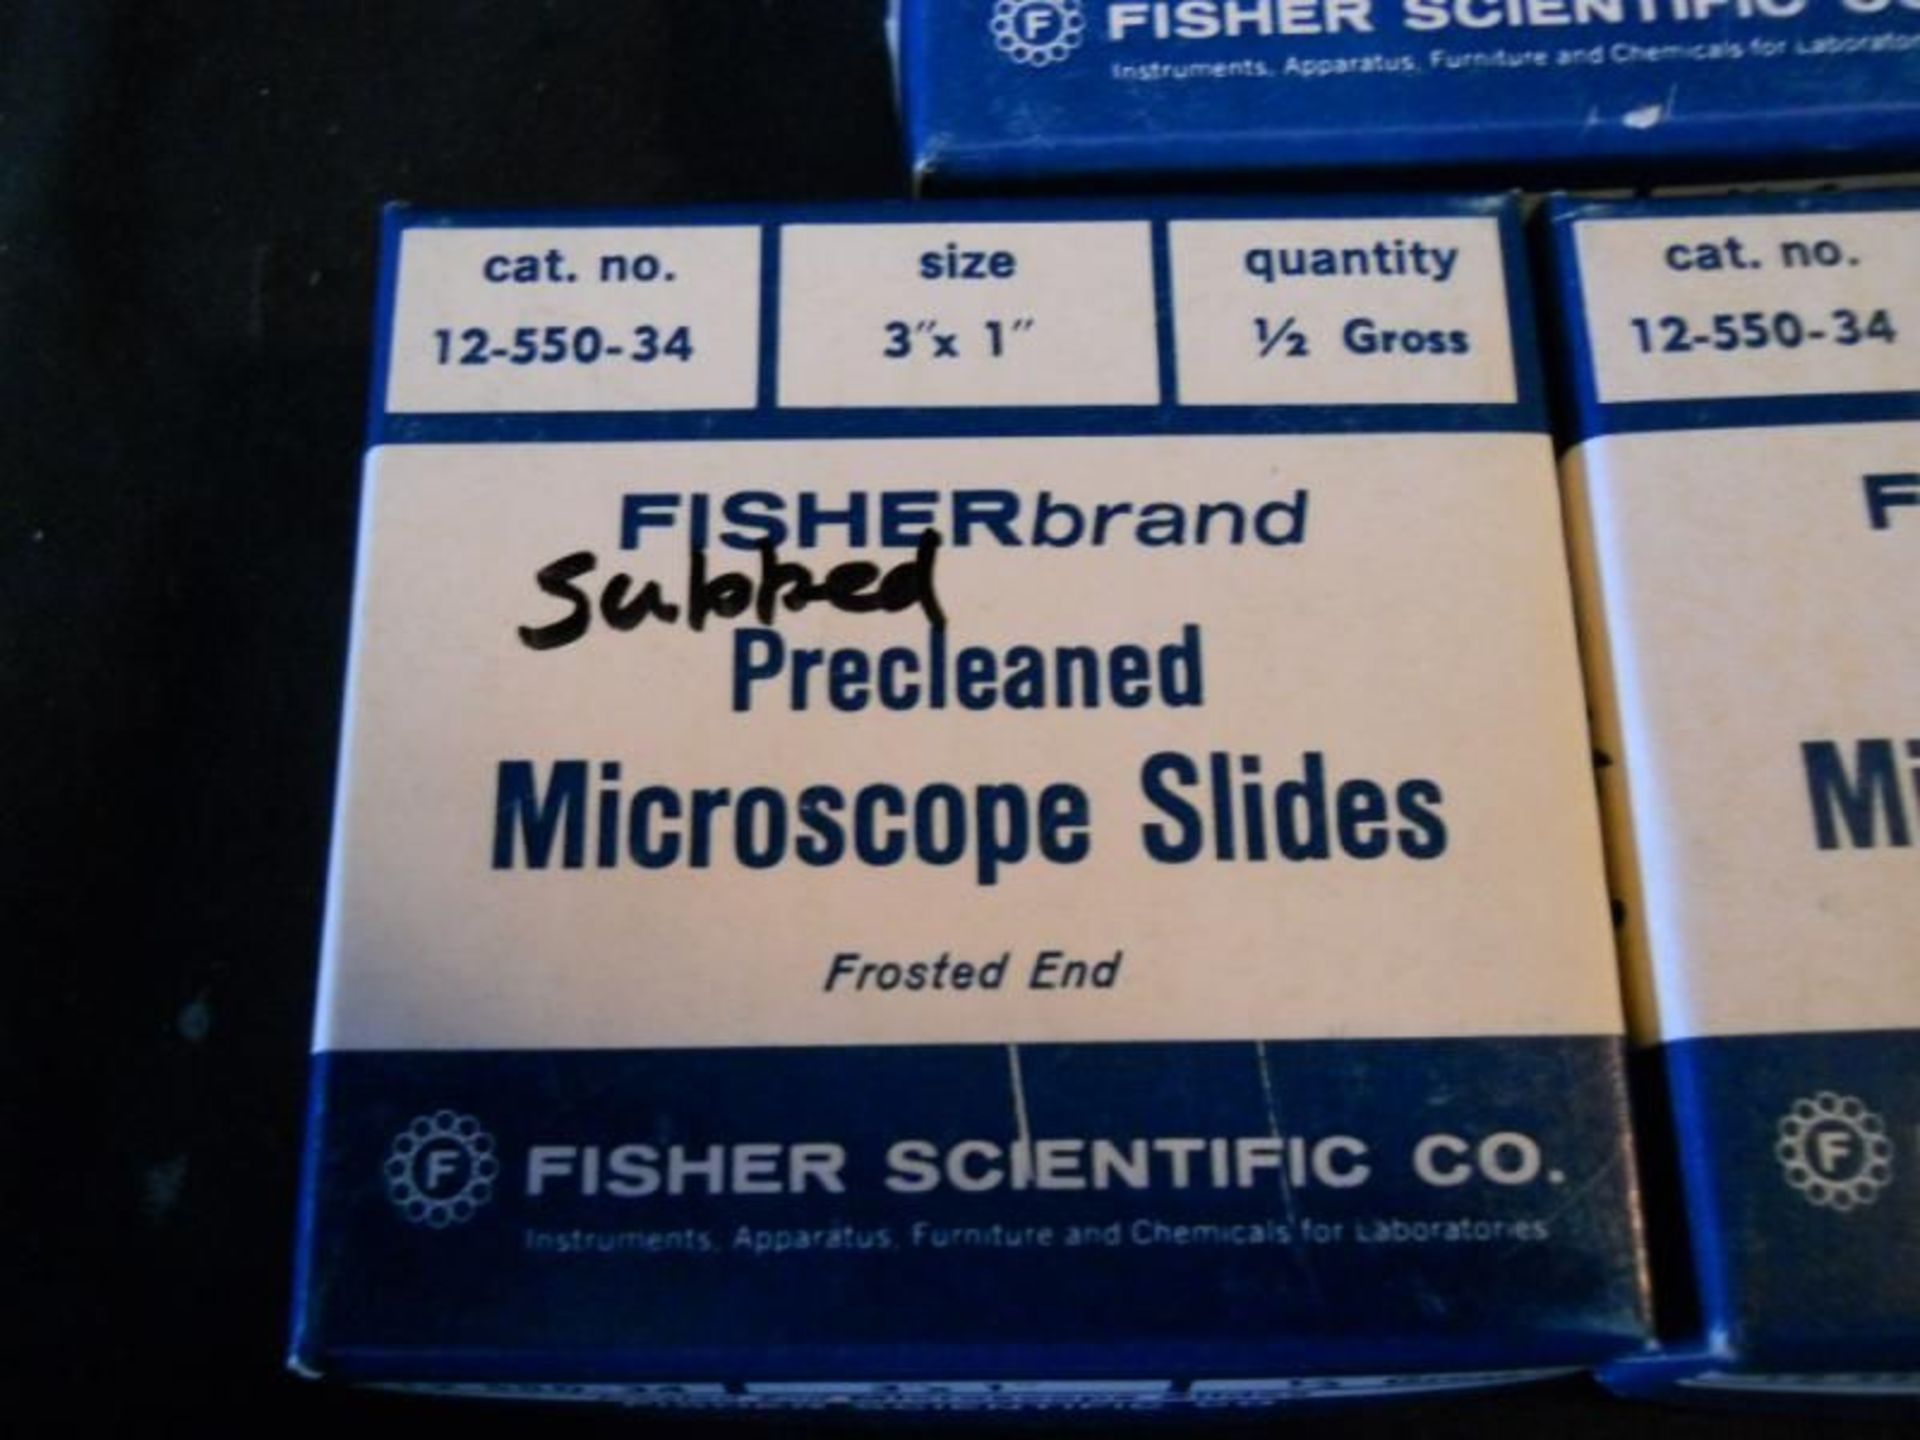 Lot of FisherBrand Frosted End Microscope Slides 3" x 1" 12-550-34 (1255034), Qty 1, 330988256616 - Image 2 of 4